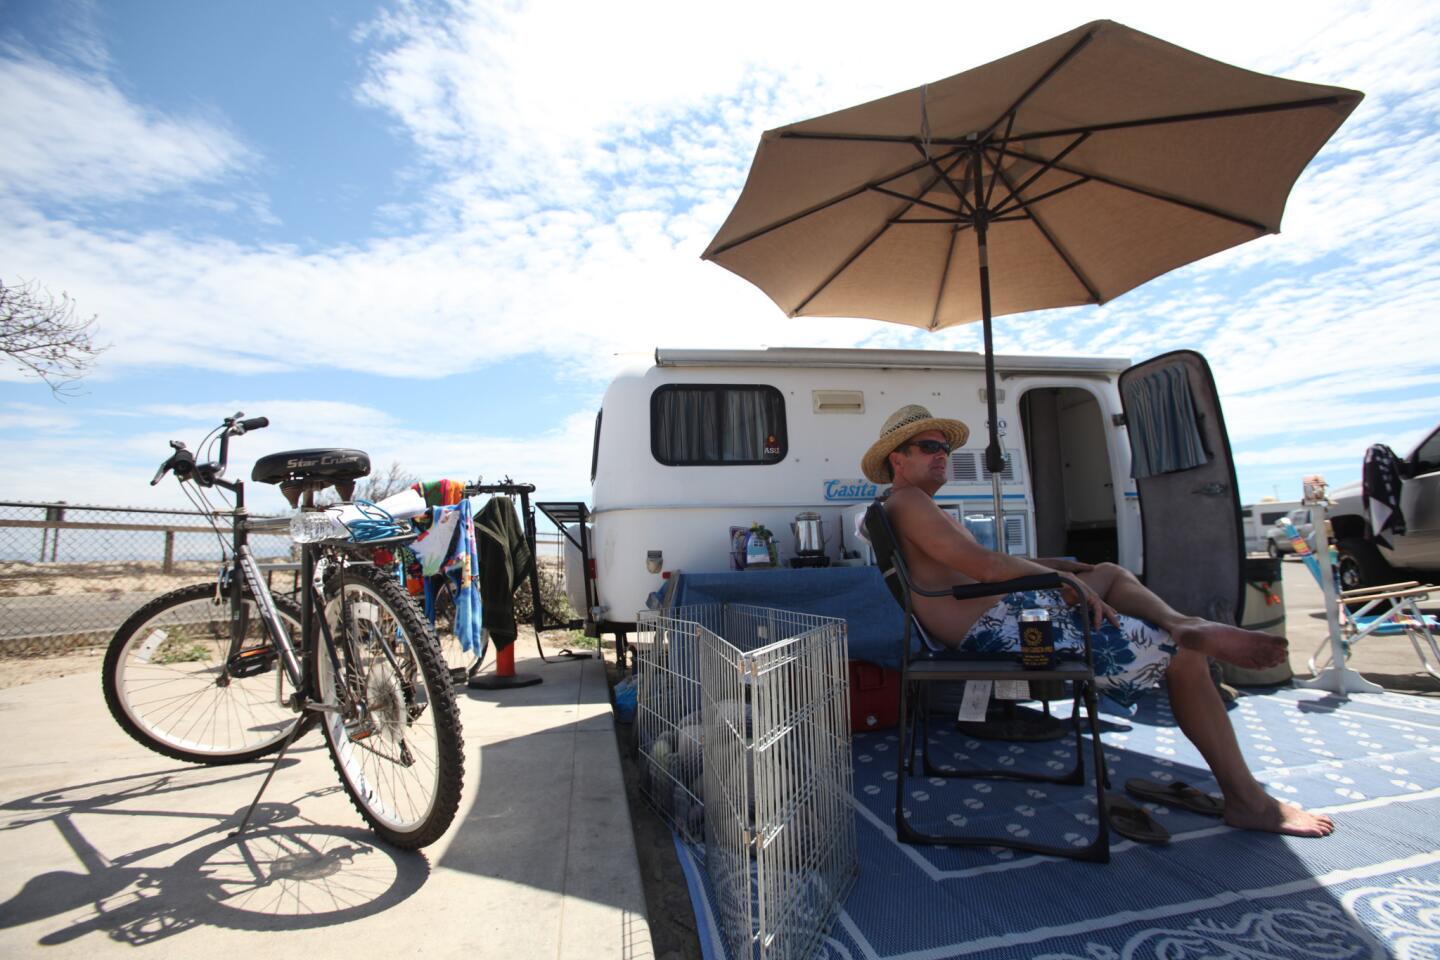 Mike Anderson, of Covina, relaxes under an umbrella next to his Casita at Bolsa Chica State Beach in Huntington Beach.